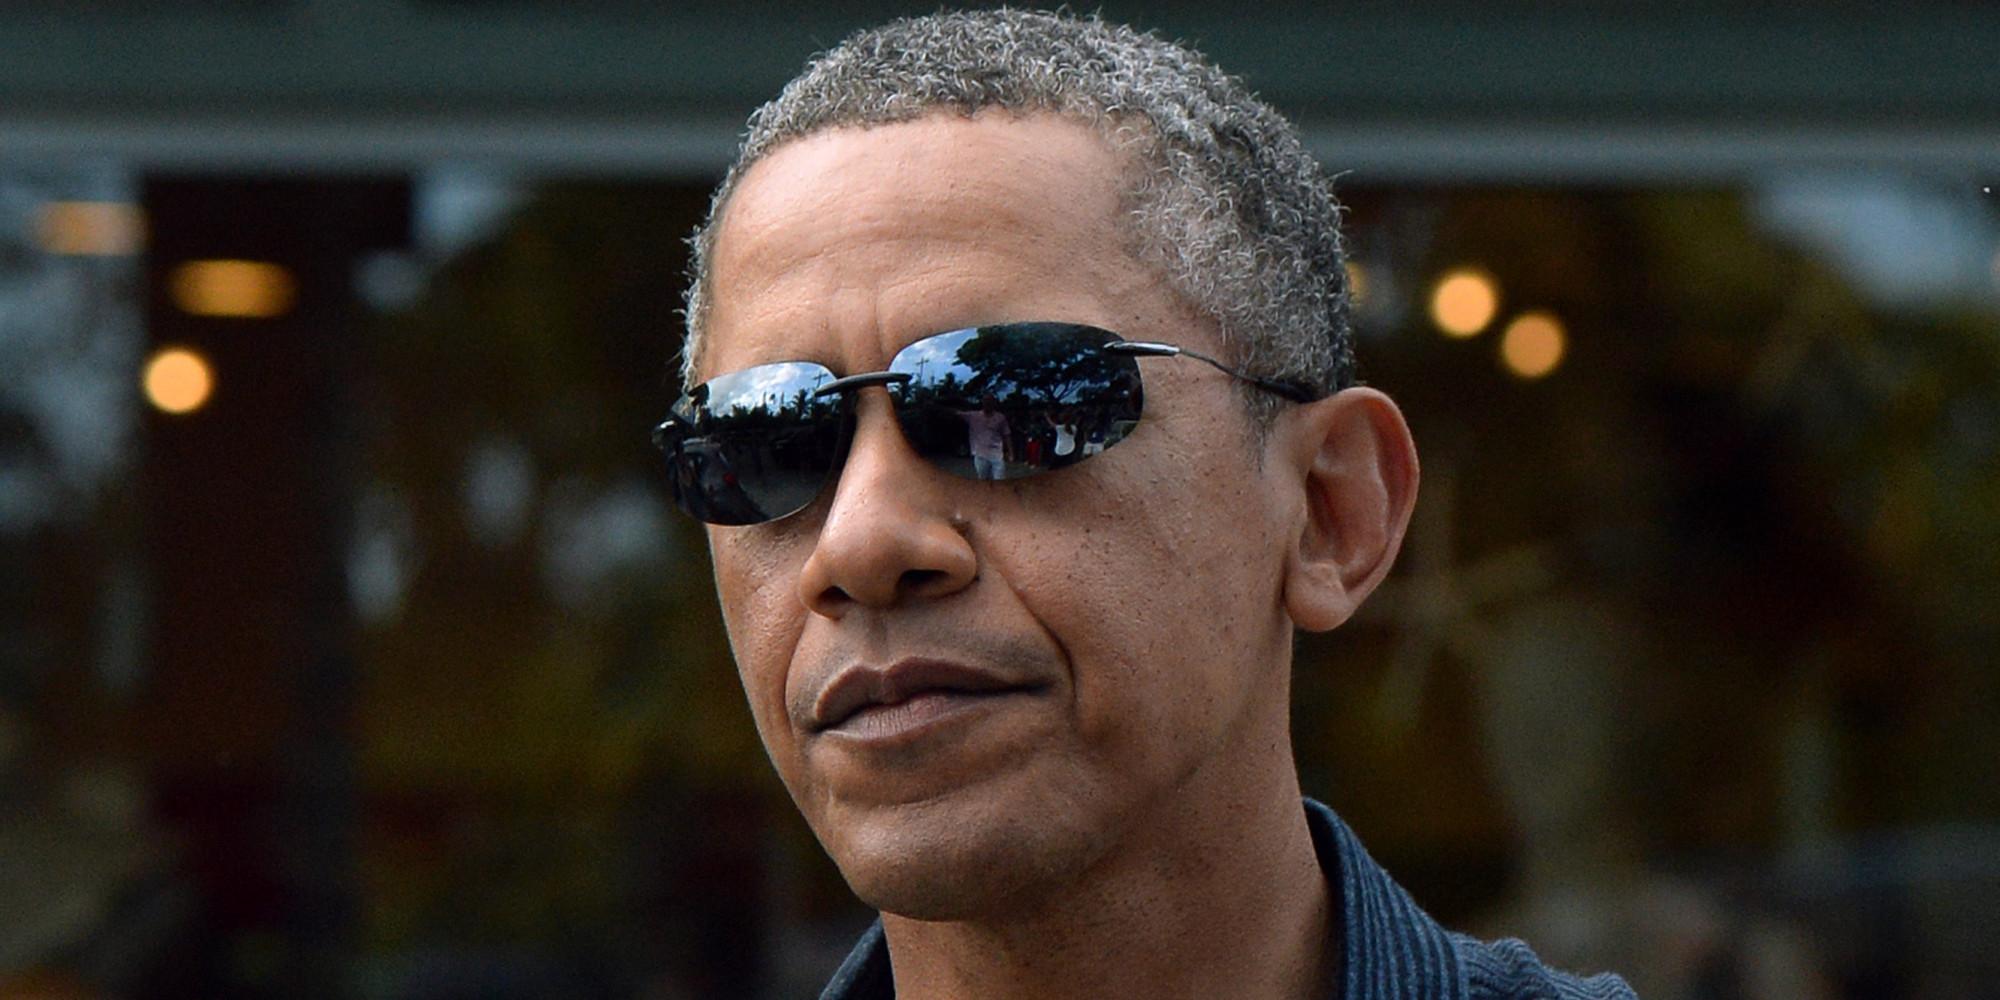 Eyesite on X: Style pages of Times magazine spotted Barack Obama